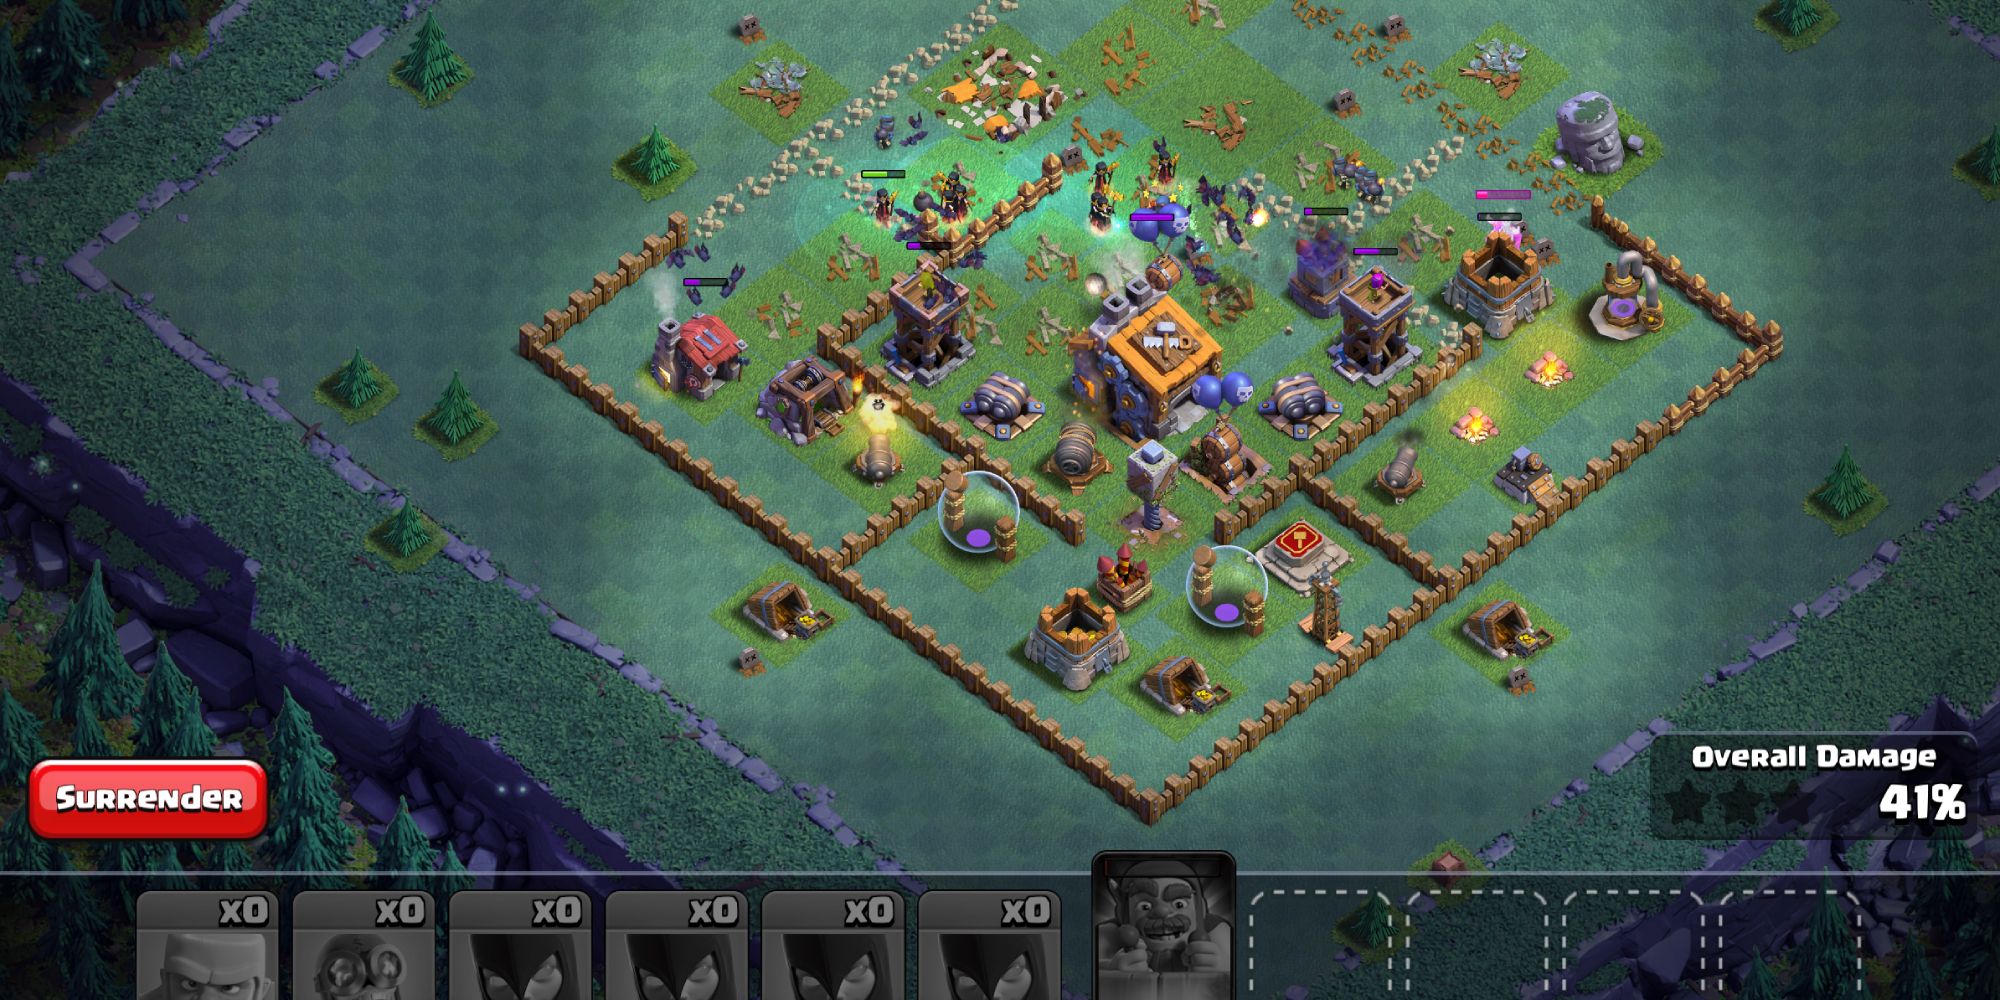 clash of clans builder base multiplayer battle in full swing with night witches destroying everything